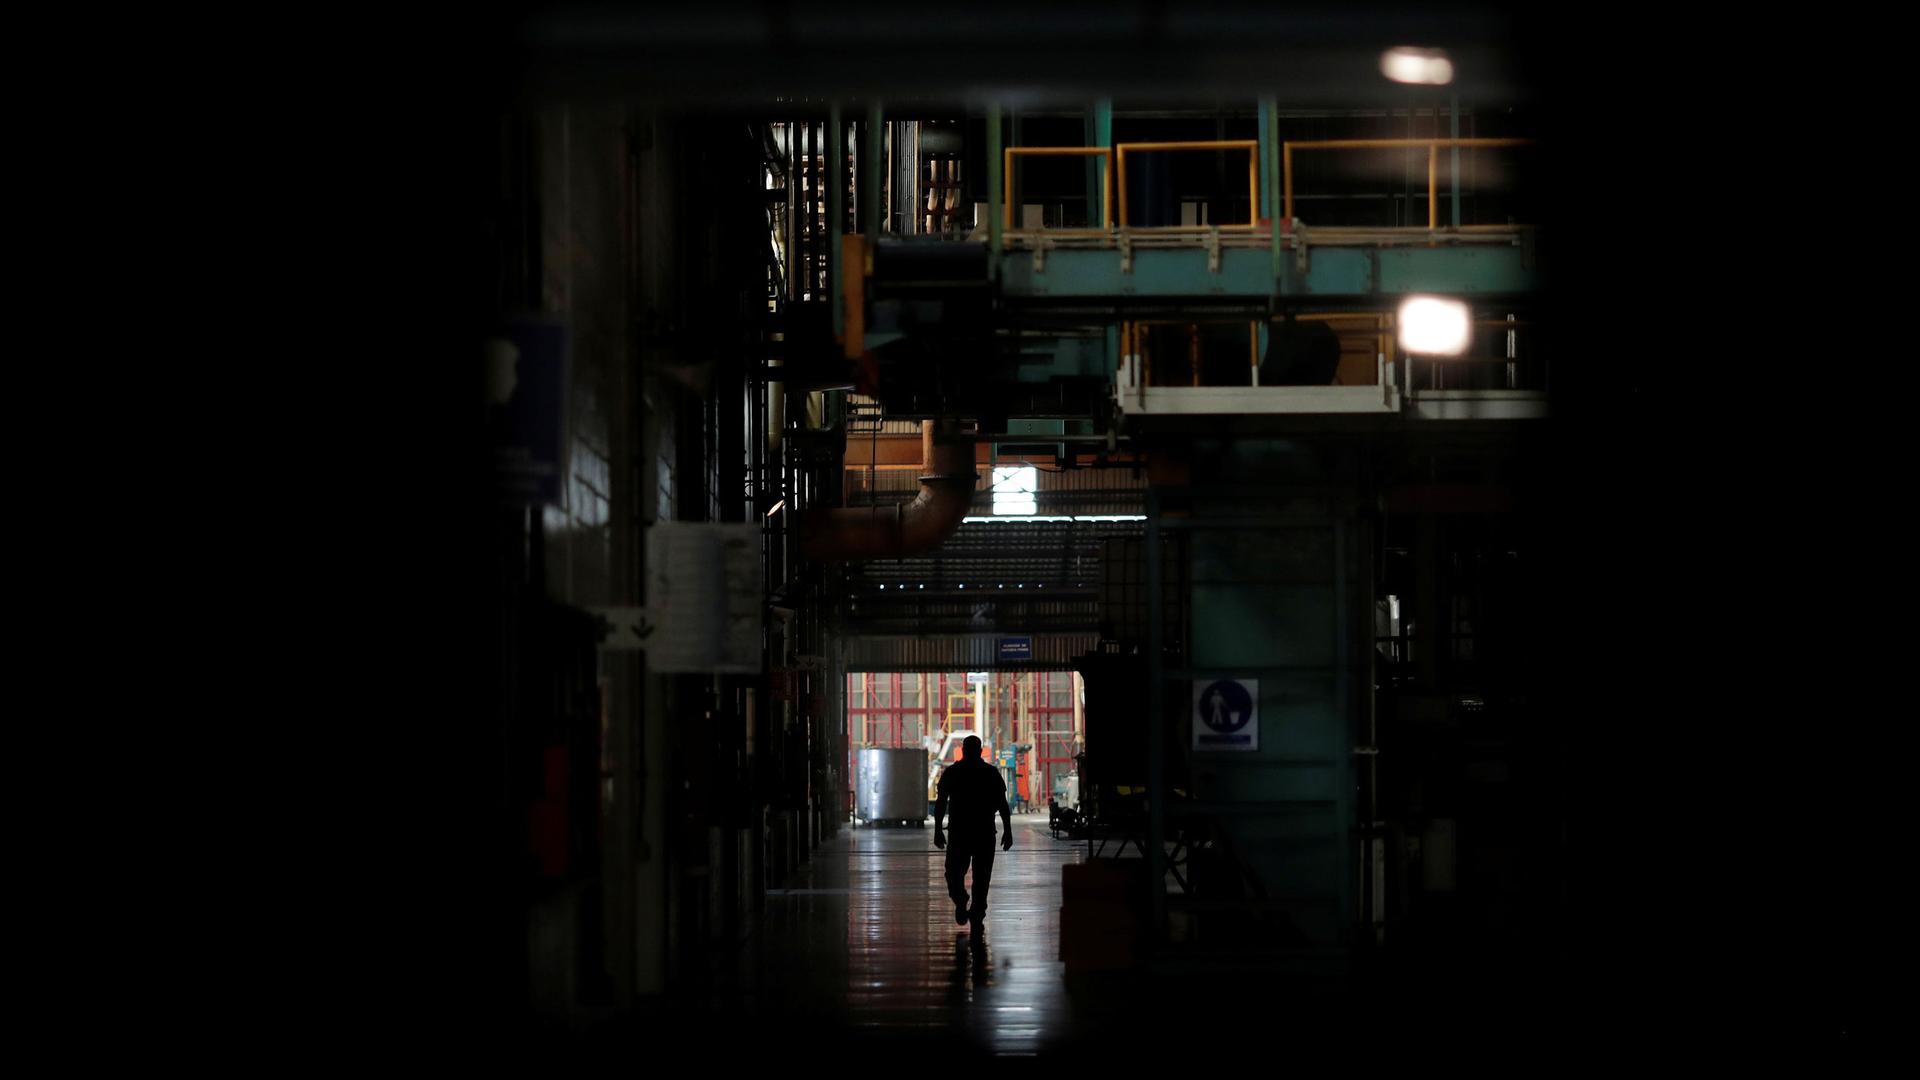 A man is shown in shadow walking past darked machinery.